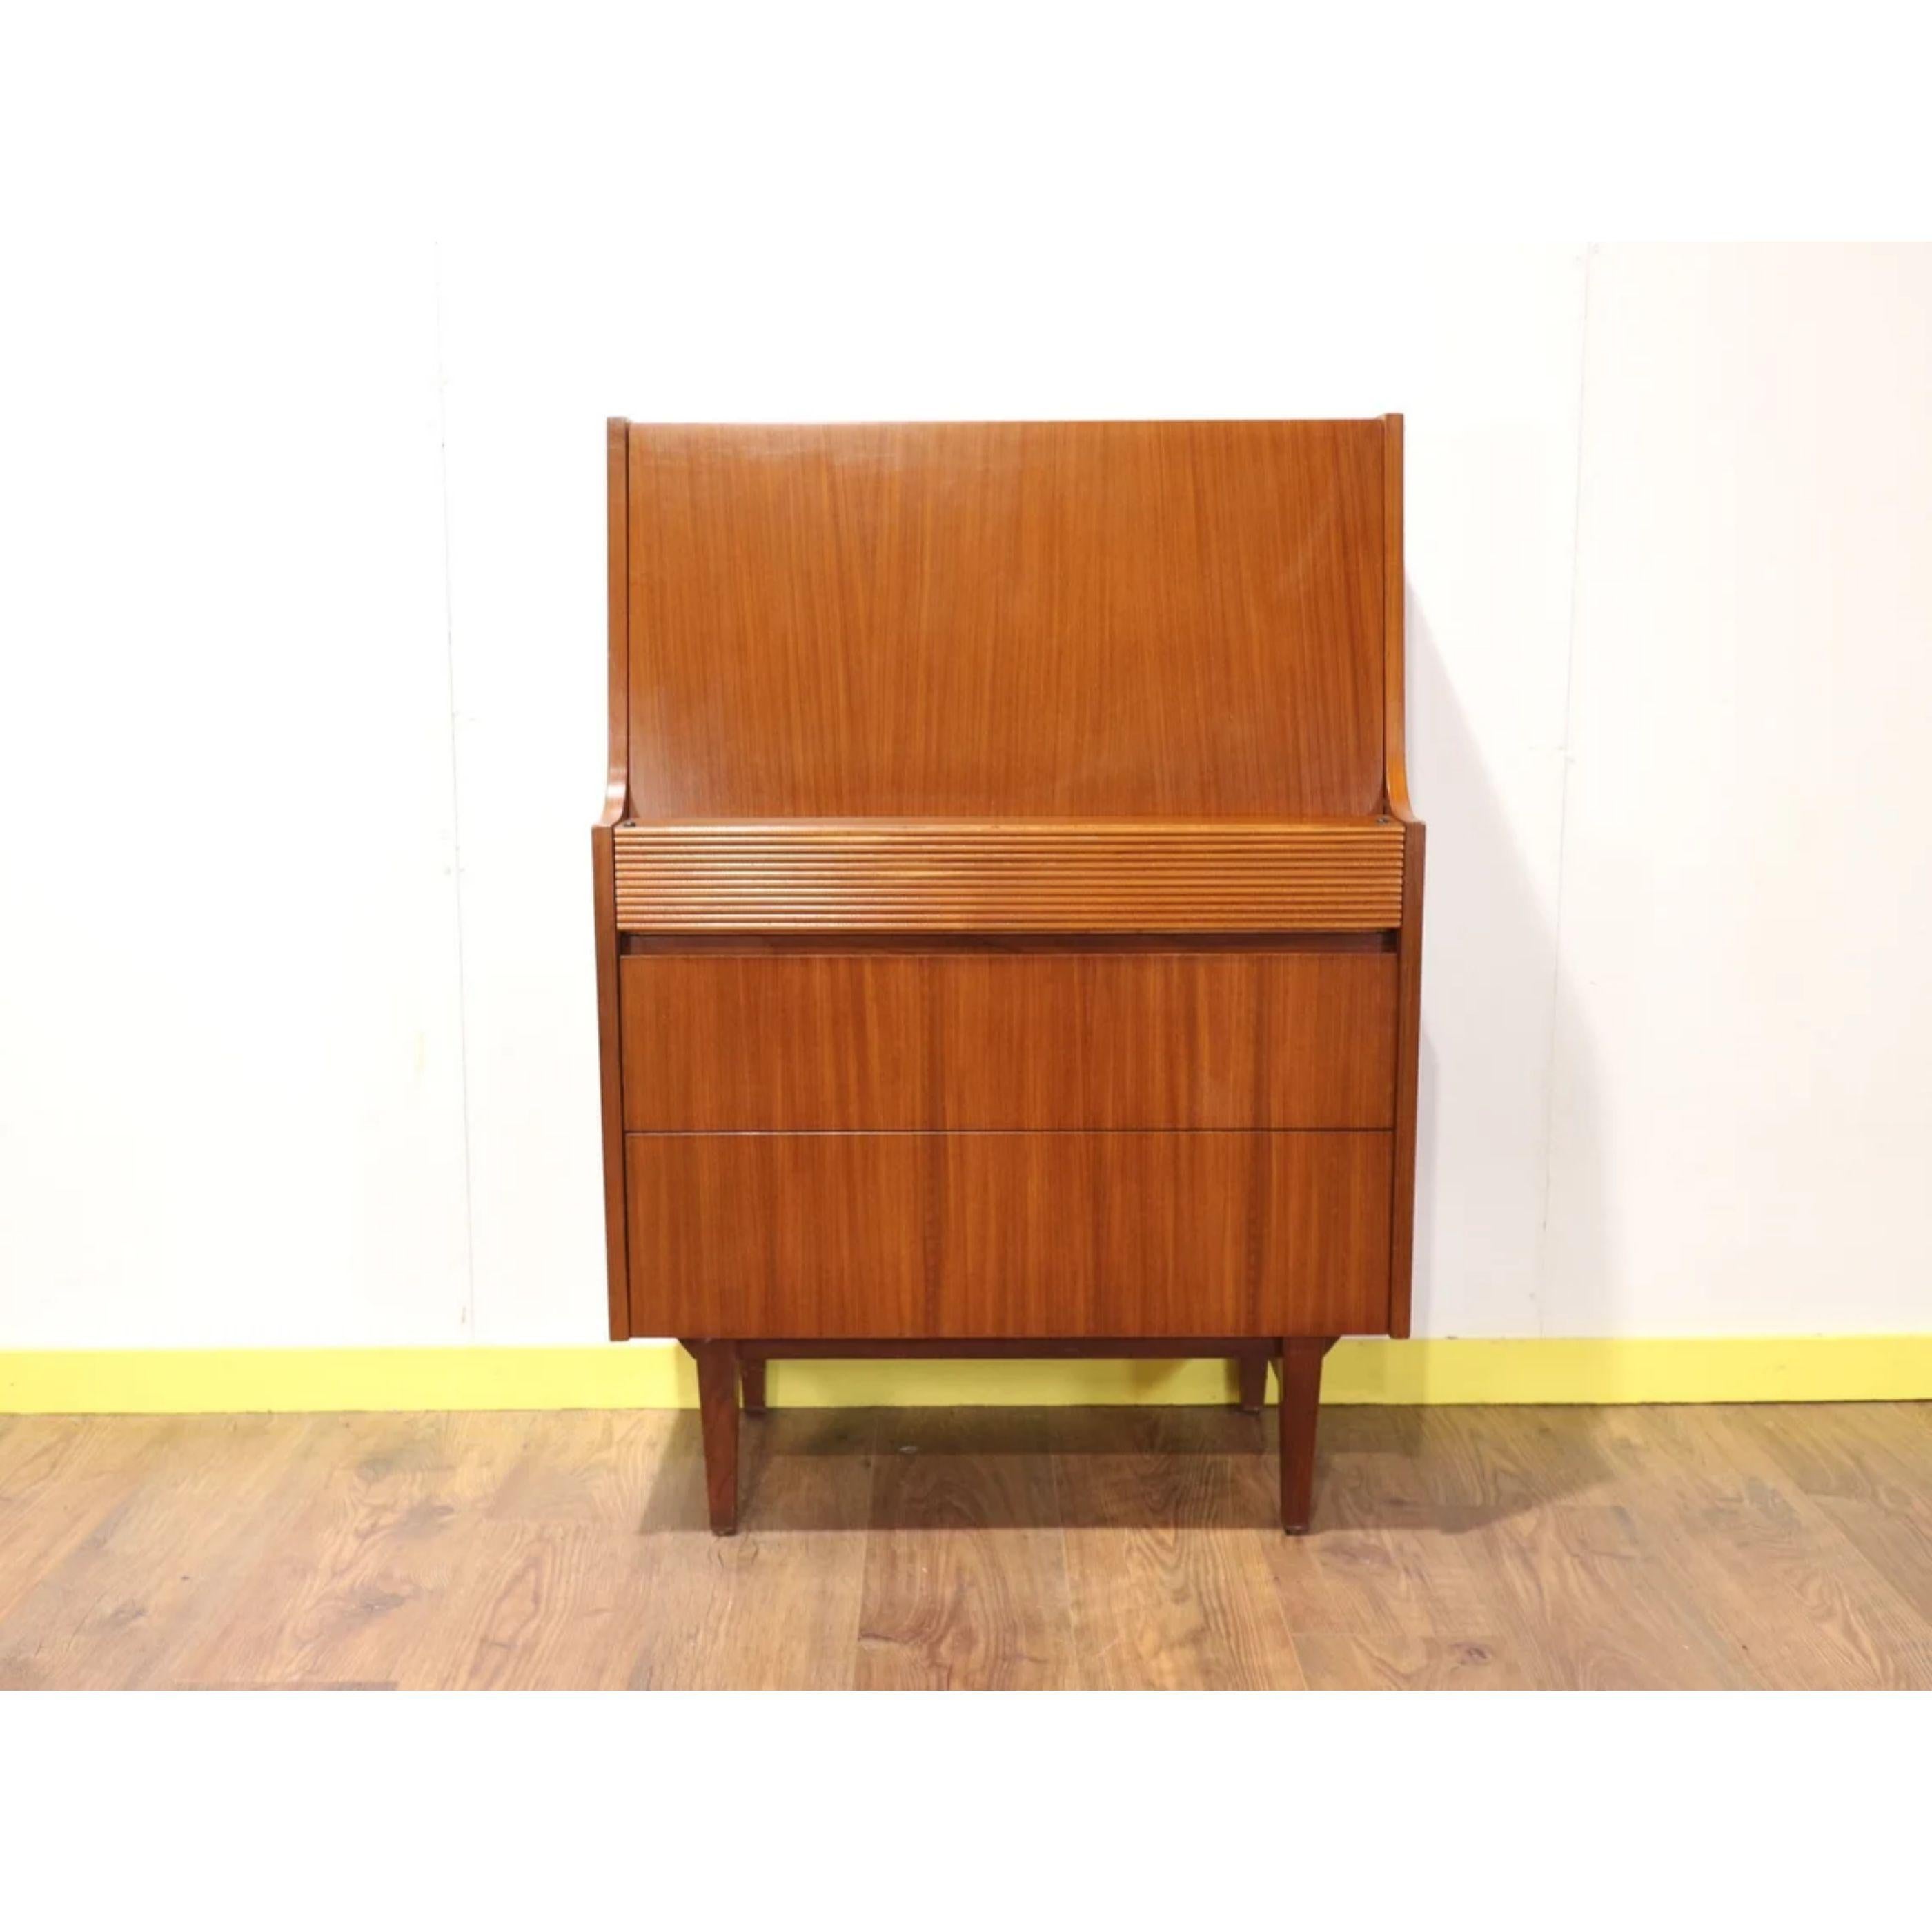 A beautiful Mid century teak bureau by Elliots of Newbury made in the UK, circa 1960s. Great for small spaces and perfect for working on a laptop or as a writing desk. There are 3 drawers all with neatly hidden openings.

Dims
w30 d16